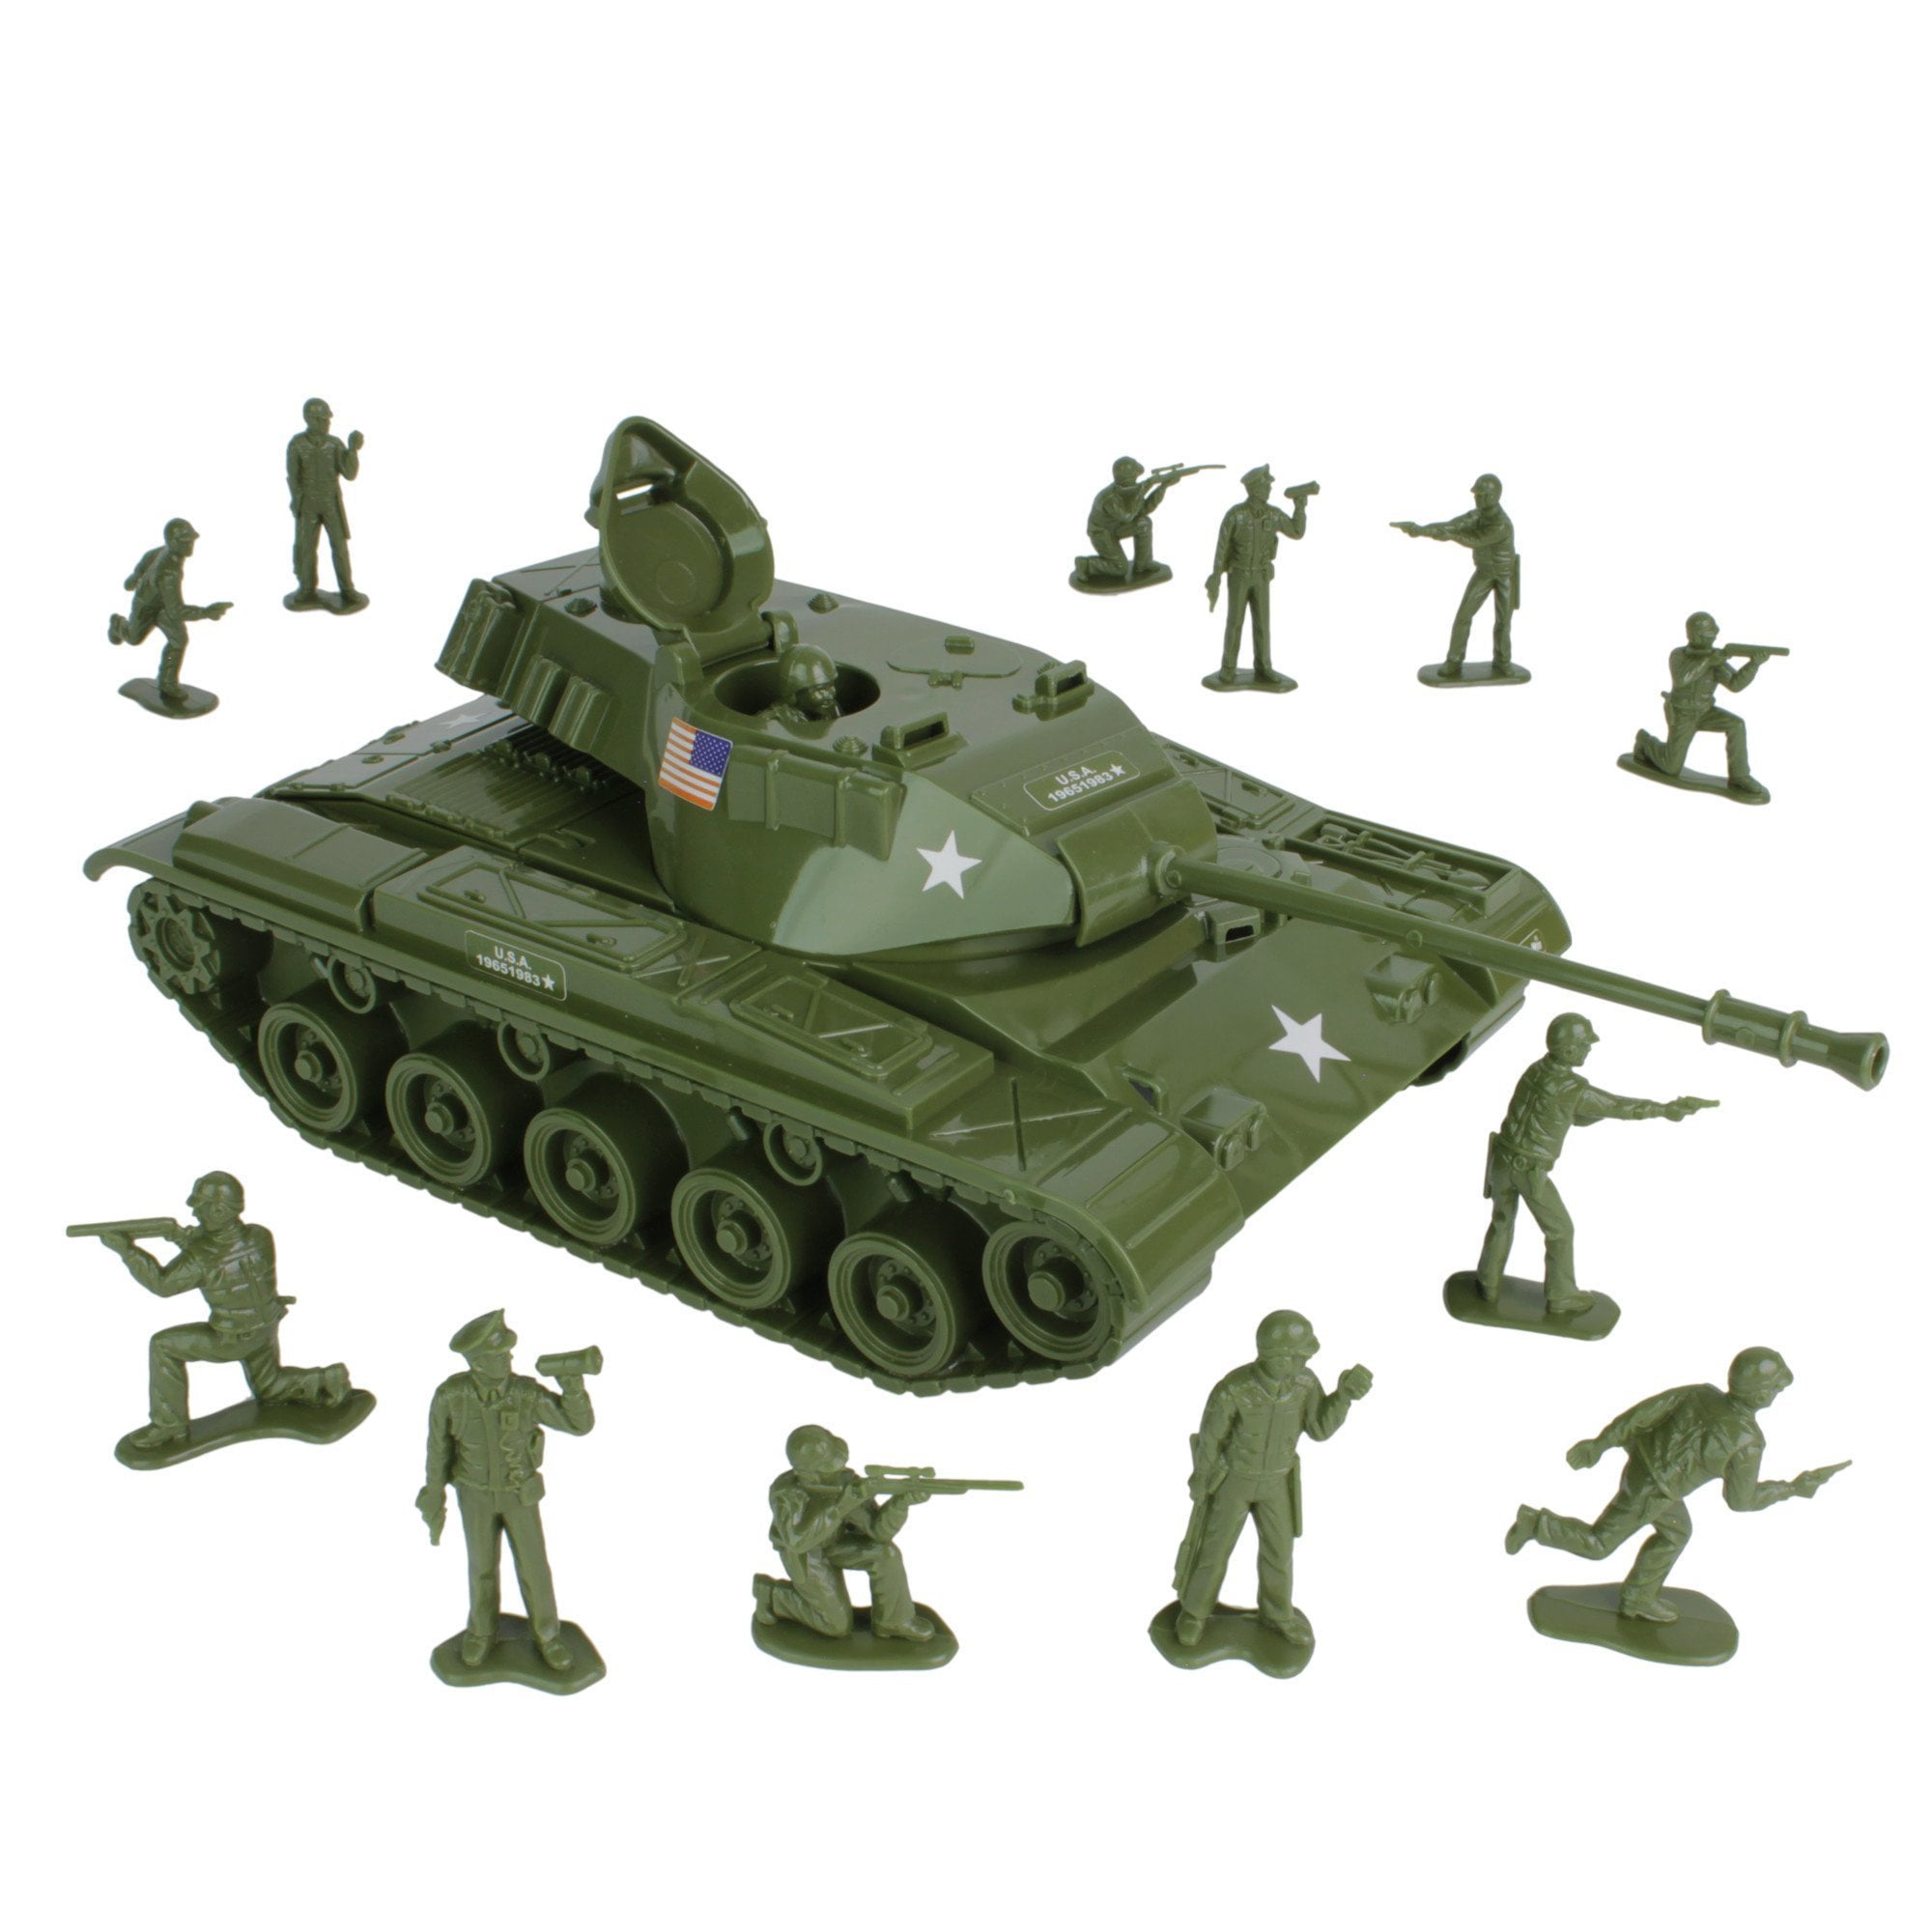 TOY CLASSIC BATTLE SOLDIERS KIDS PLAYTIME ARMY SOLDIERS WITH STORAGE BAG 